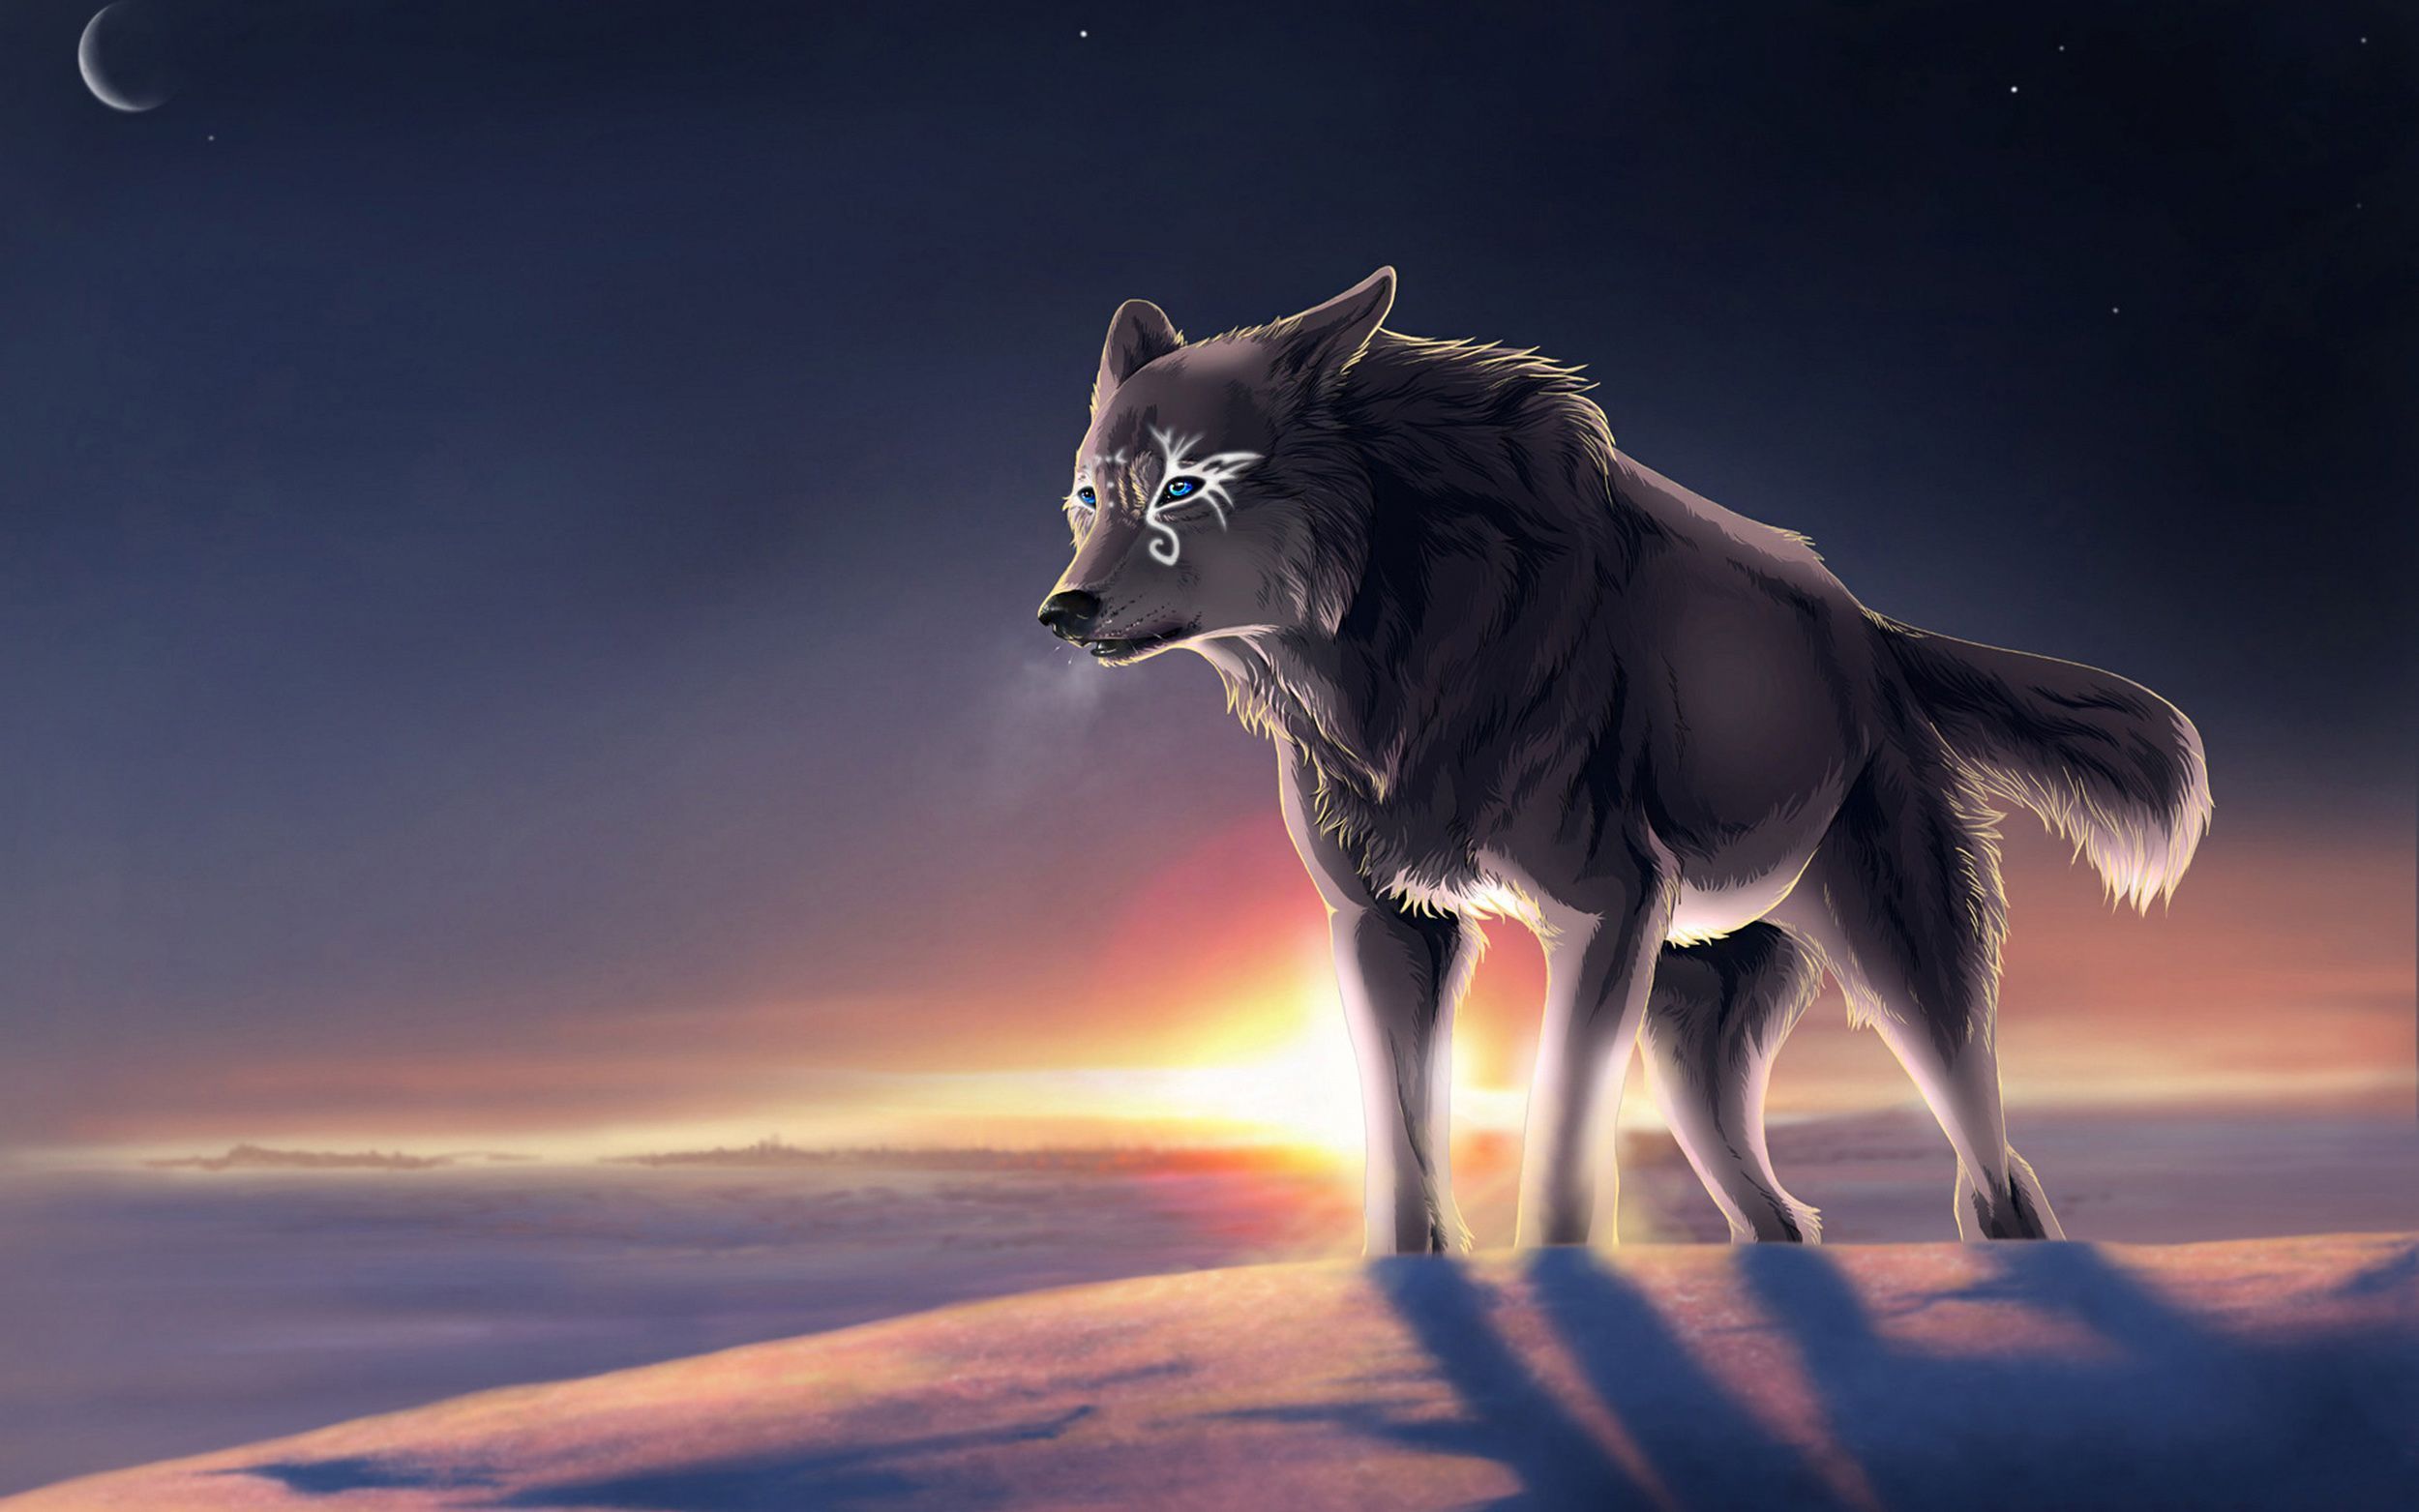 100+] Wolf Girl Wallpapers | Wallpapers.com